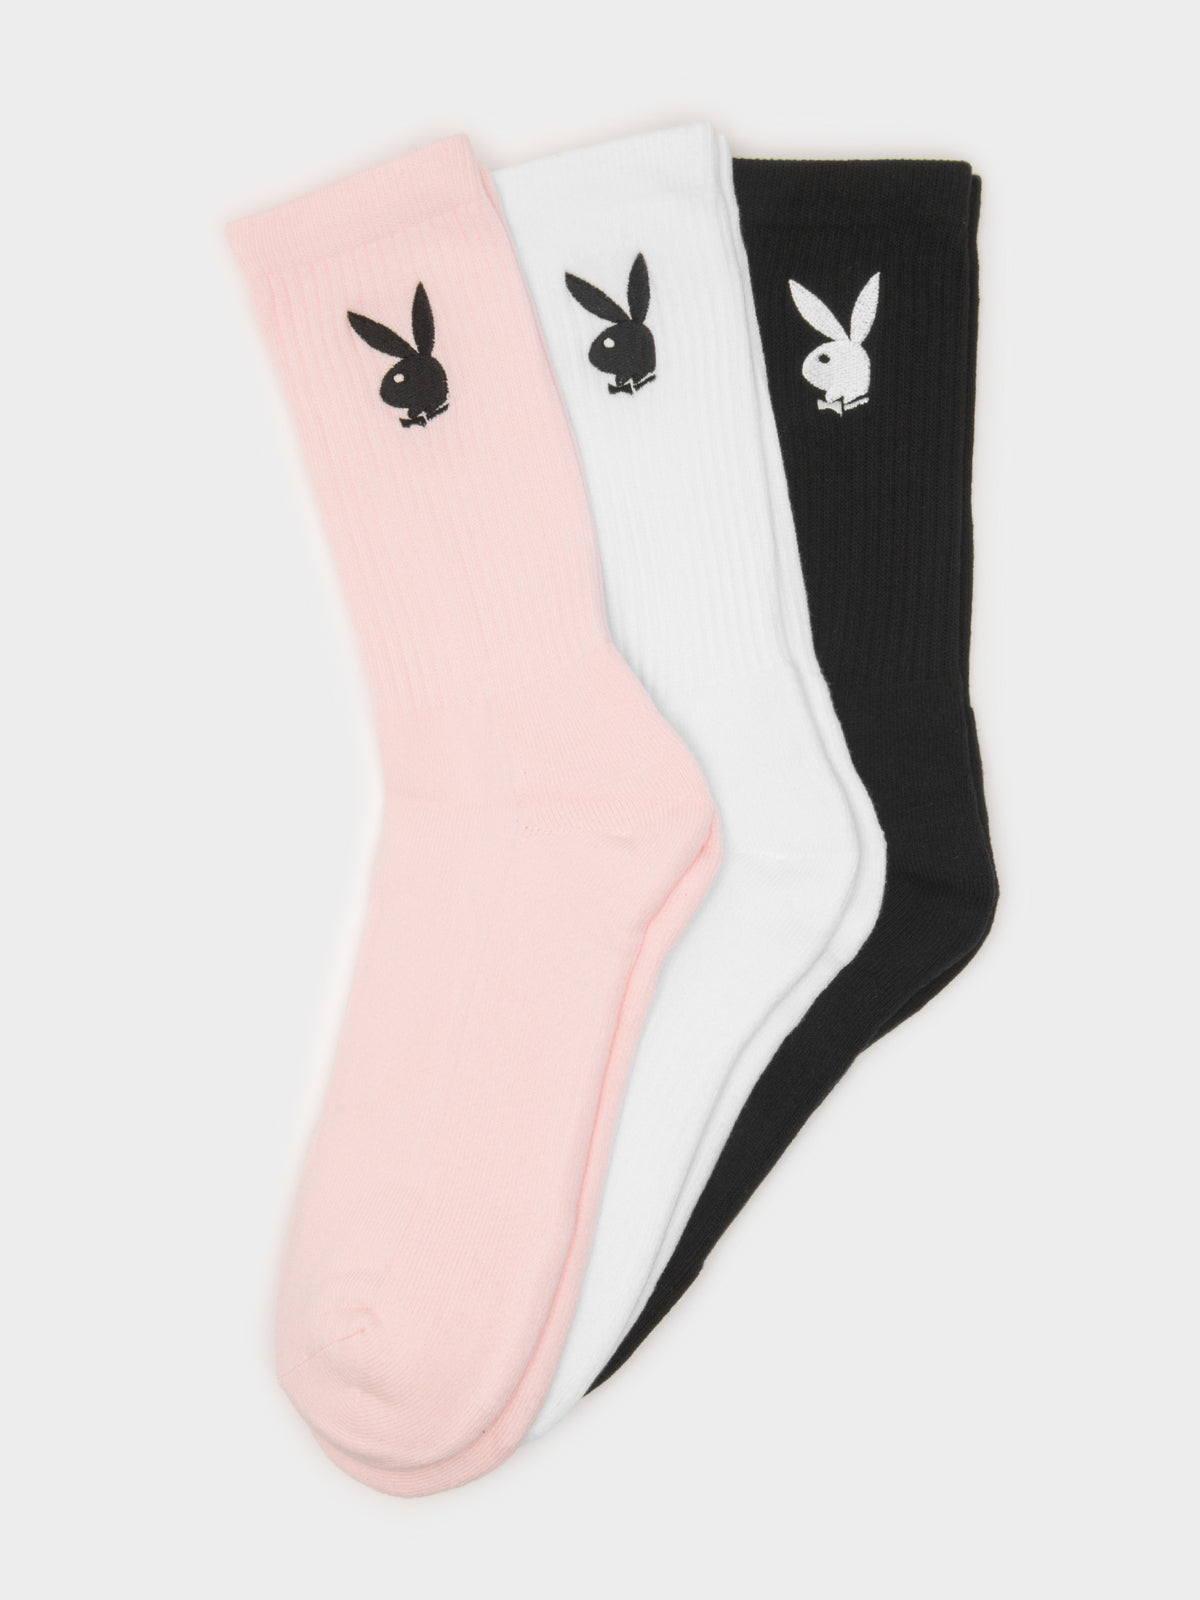 3 Pairs of Bunny Crew Socks in Pink, White &amp; Black